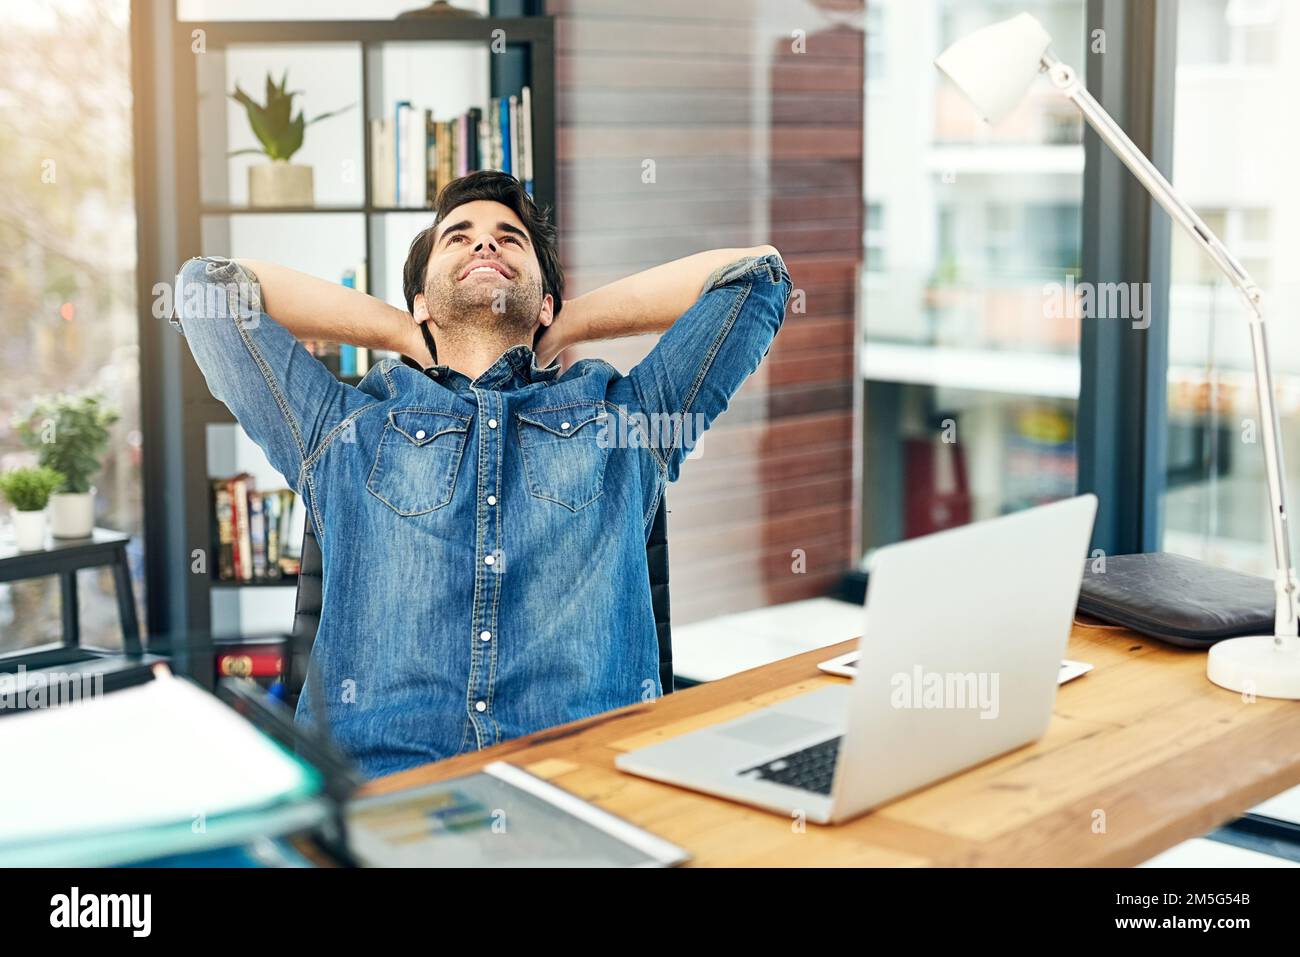 Its been a perfect and productive day. a young businessman leaning back in his chair. Stock Photo